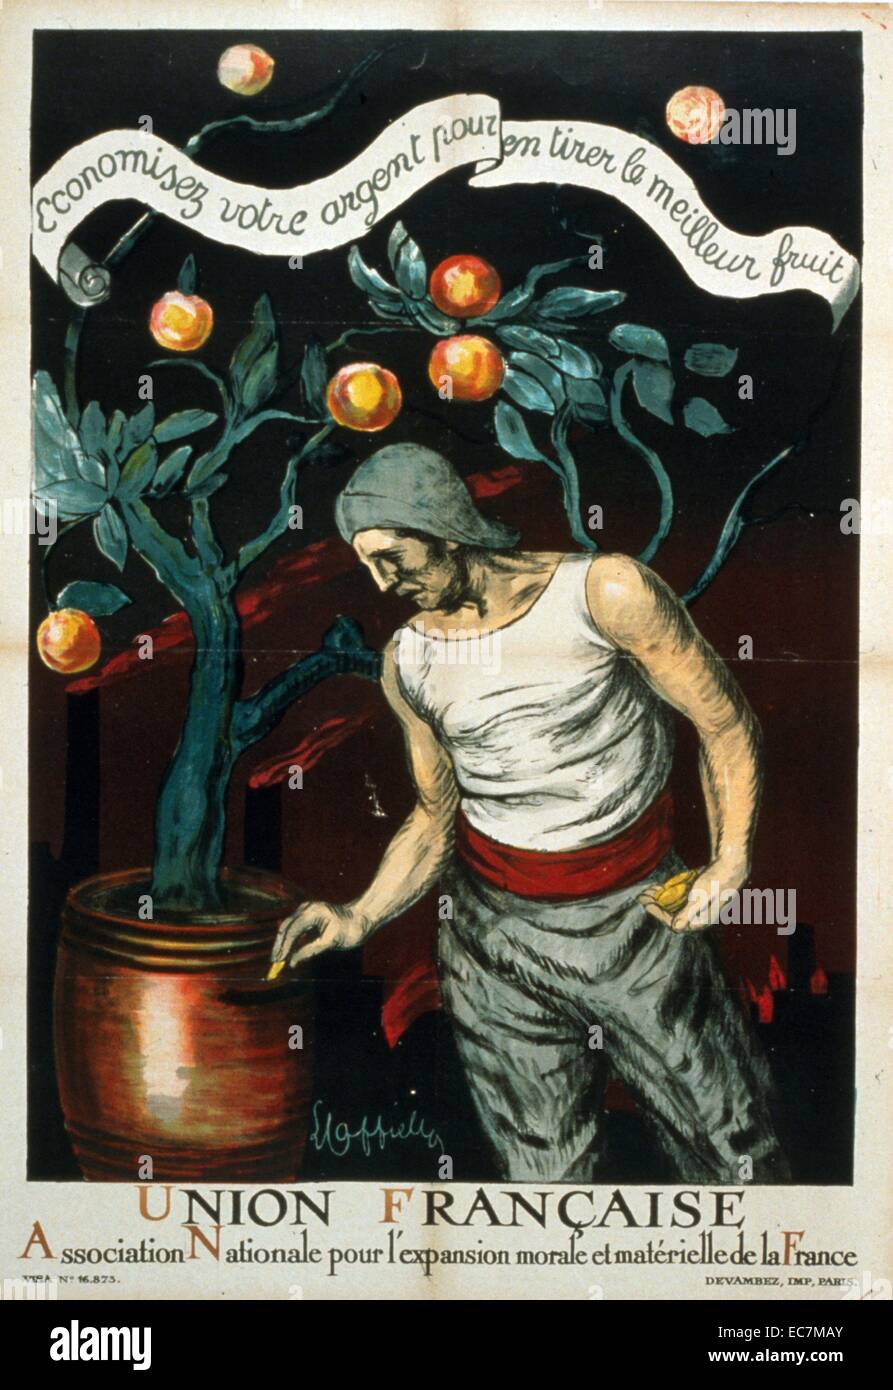 Combined National French Association for the moral and material growth of France. Save your money for greater benefits. A man places coins into a pot which holds a fruit tree. Stock Photo